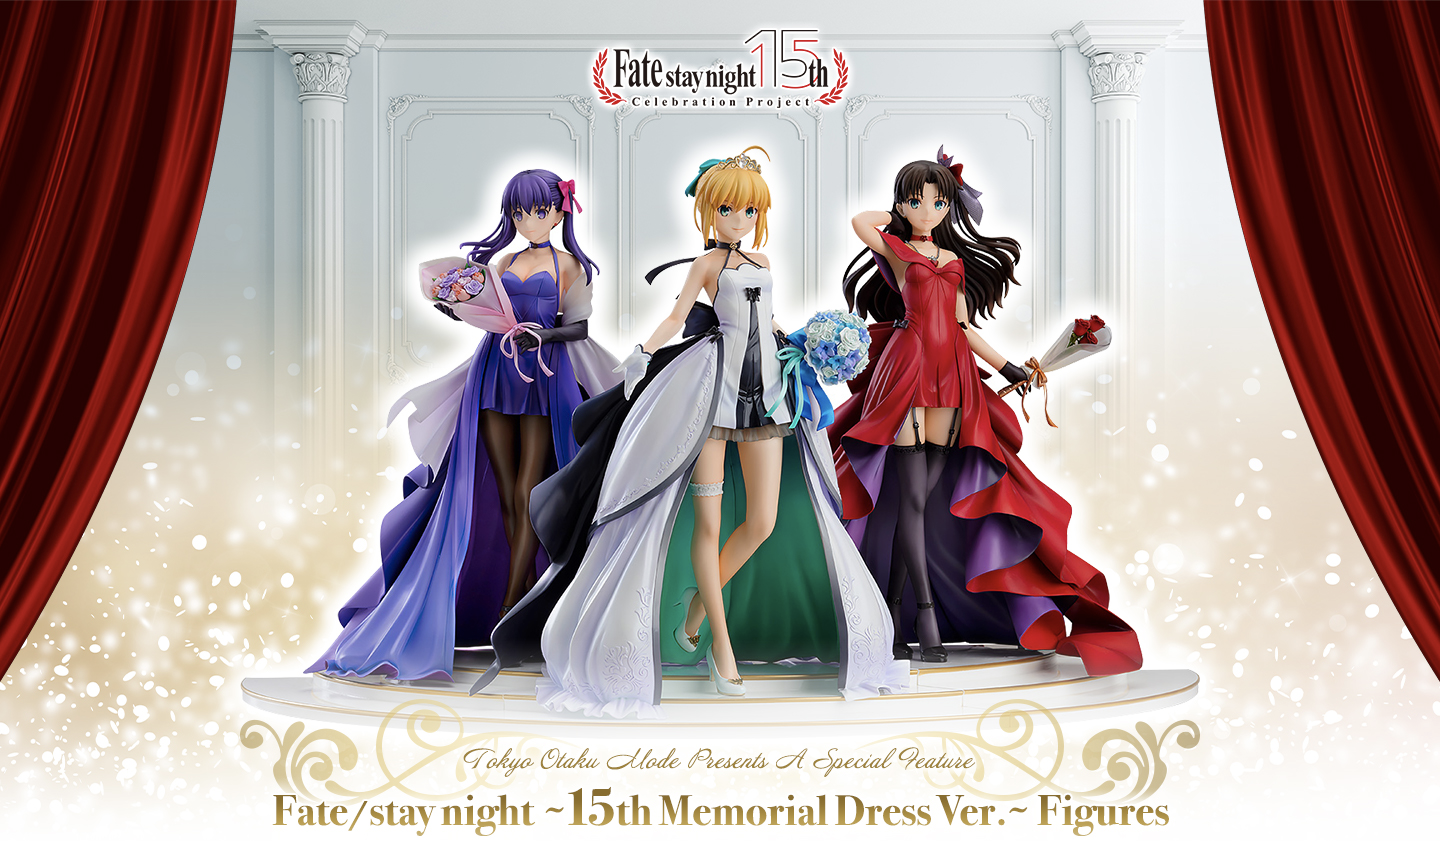 Fate/stay night ~15th Memorial Dress Ver.~ Figures